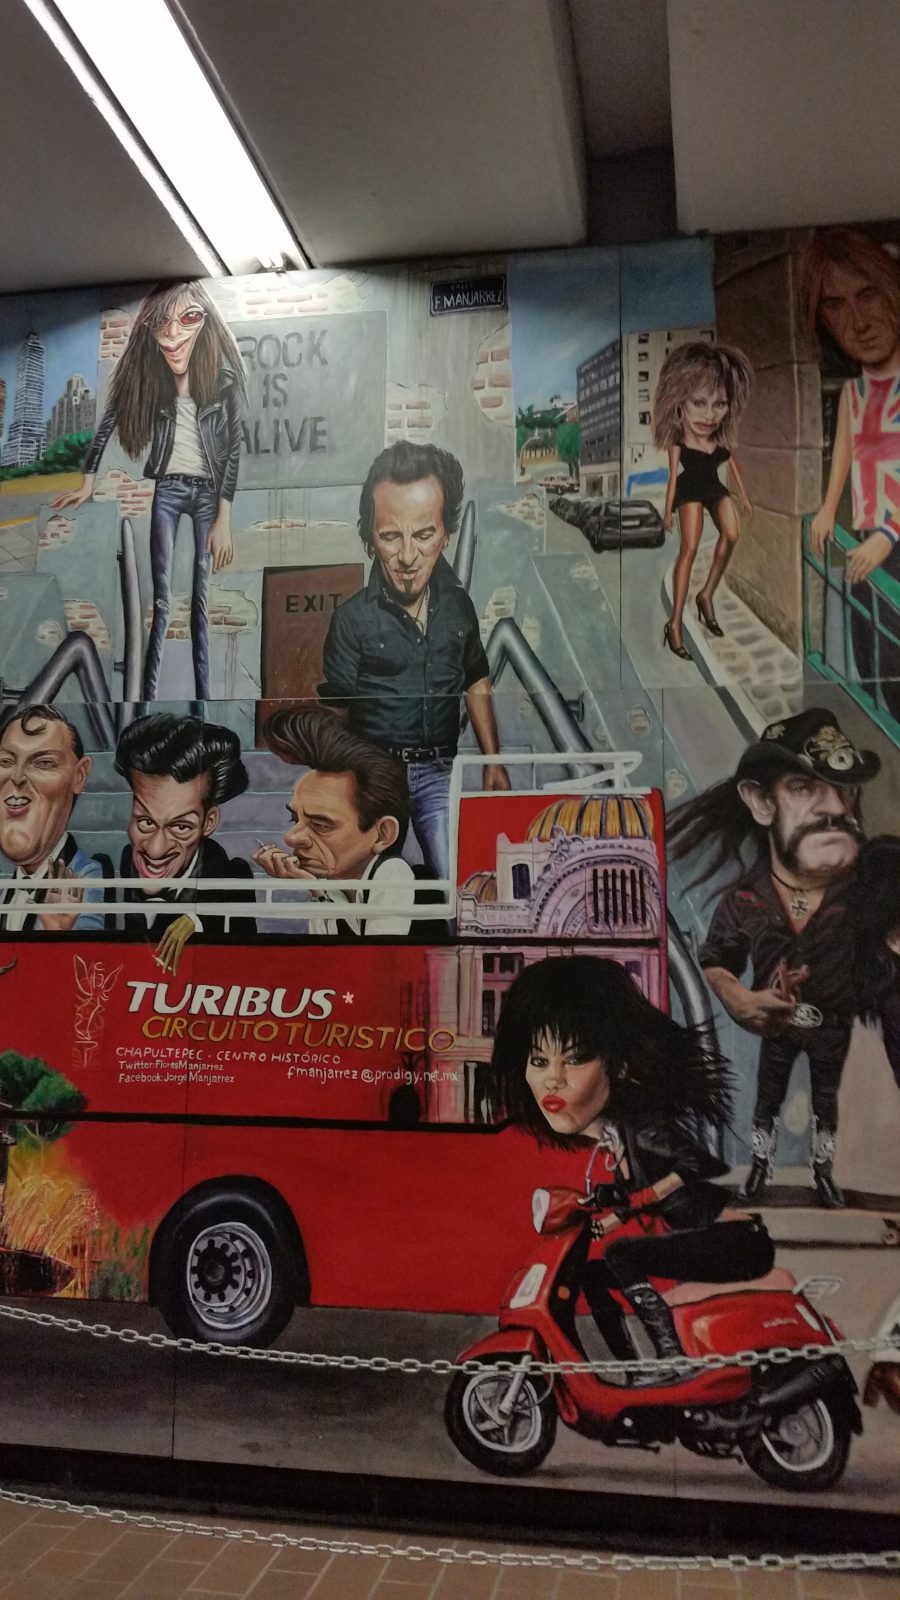 A view of the famous rock 'n roll murals in Auditorio Metro Station in Mexico City painted by artist Jorge Manjarrez showing Bruce Springsteen and Lemy.